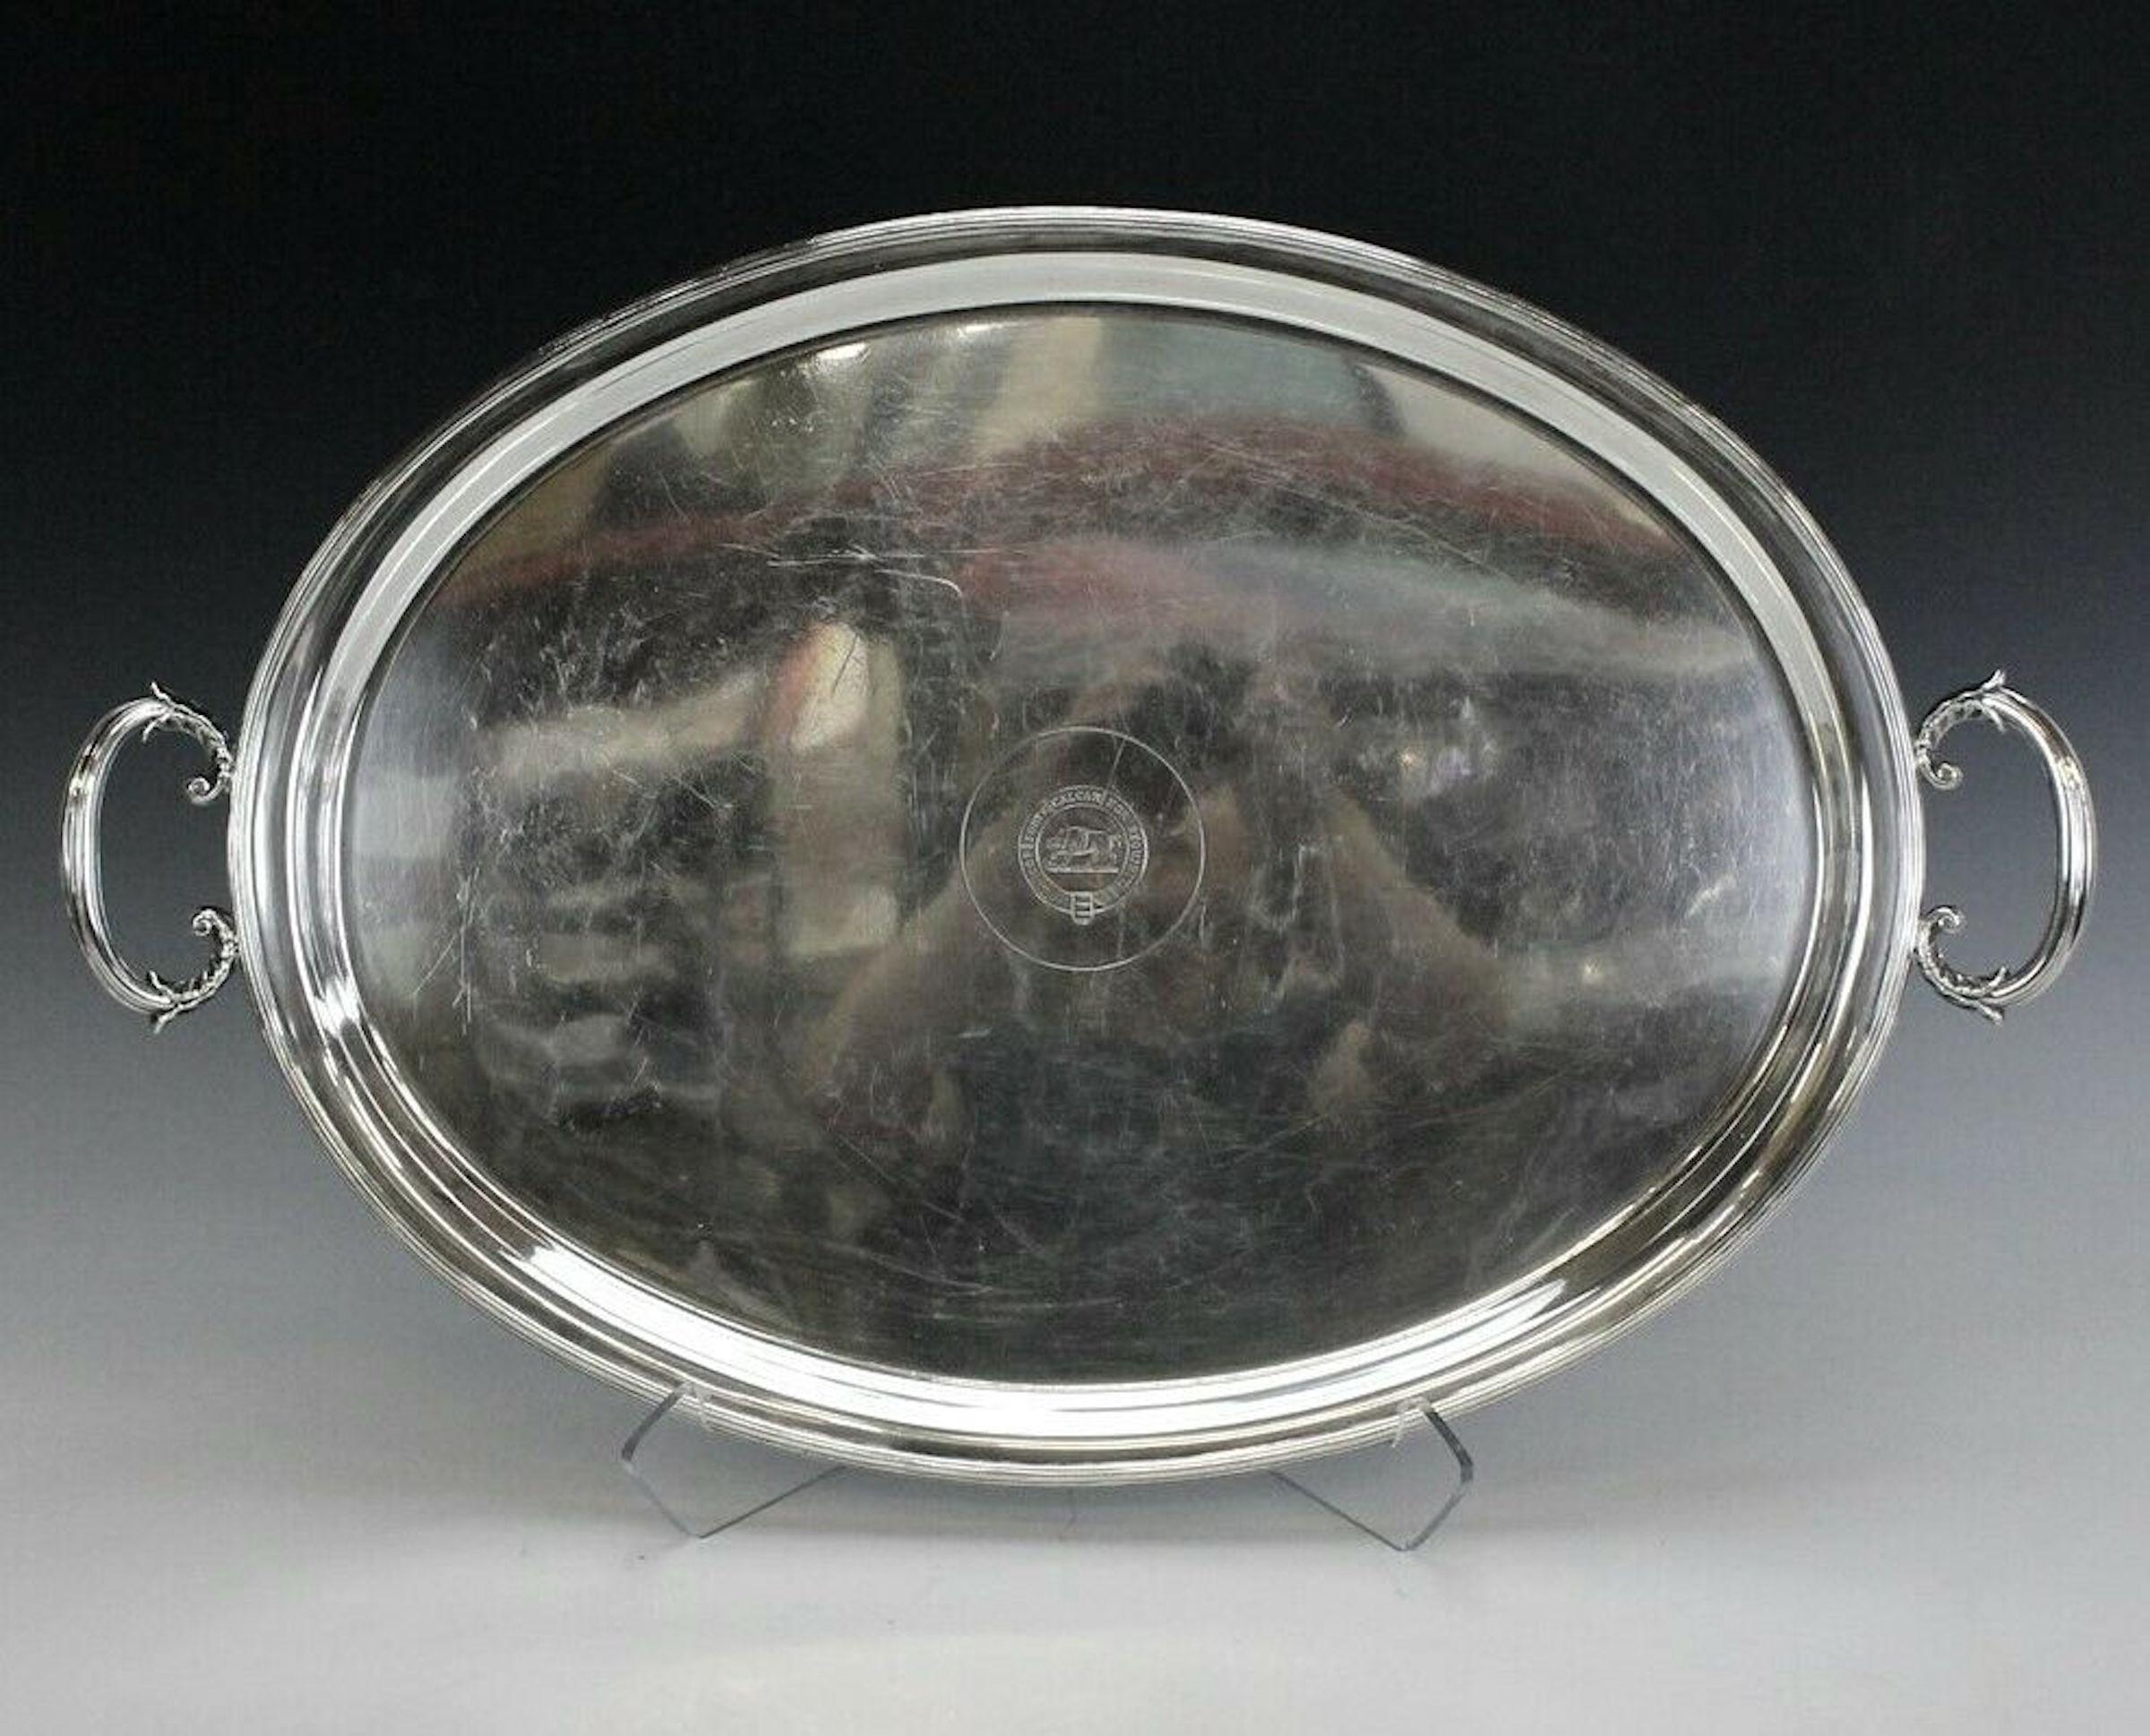 Antique Mappin Brothers Regency Style Silverplated Oval Handled Tray

Encounter a luxurious slice of history with our Antique Mappin Brothers regency style silver plated oval handled tray. Its notable center showcases a bold armorial crest featuring